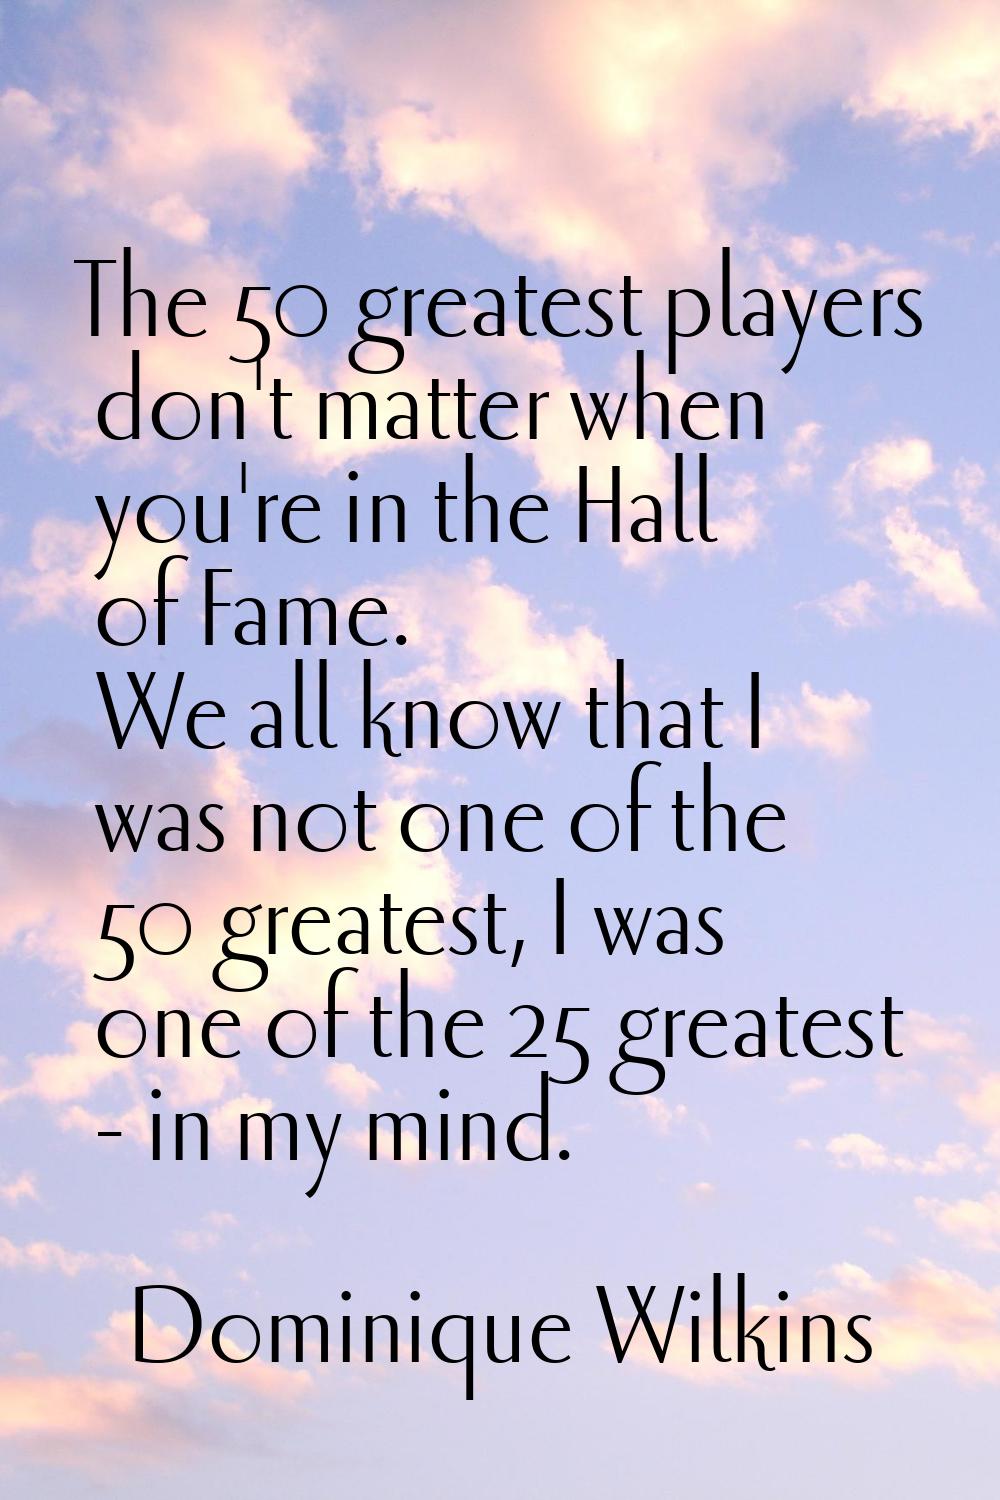 The 50 greatest players don't matter when you're in the Hall of Fame. We all know that I was not on